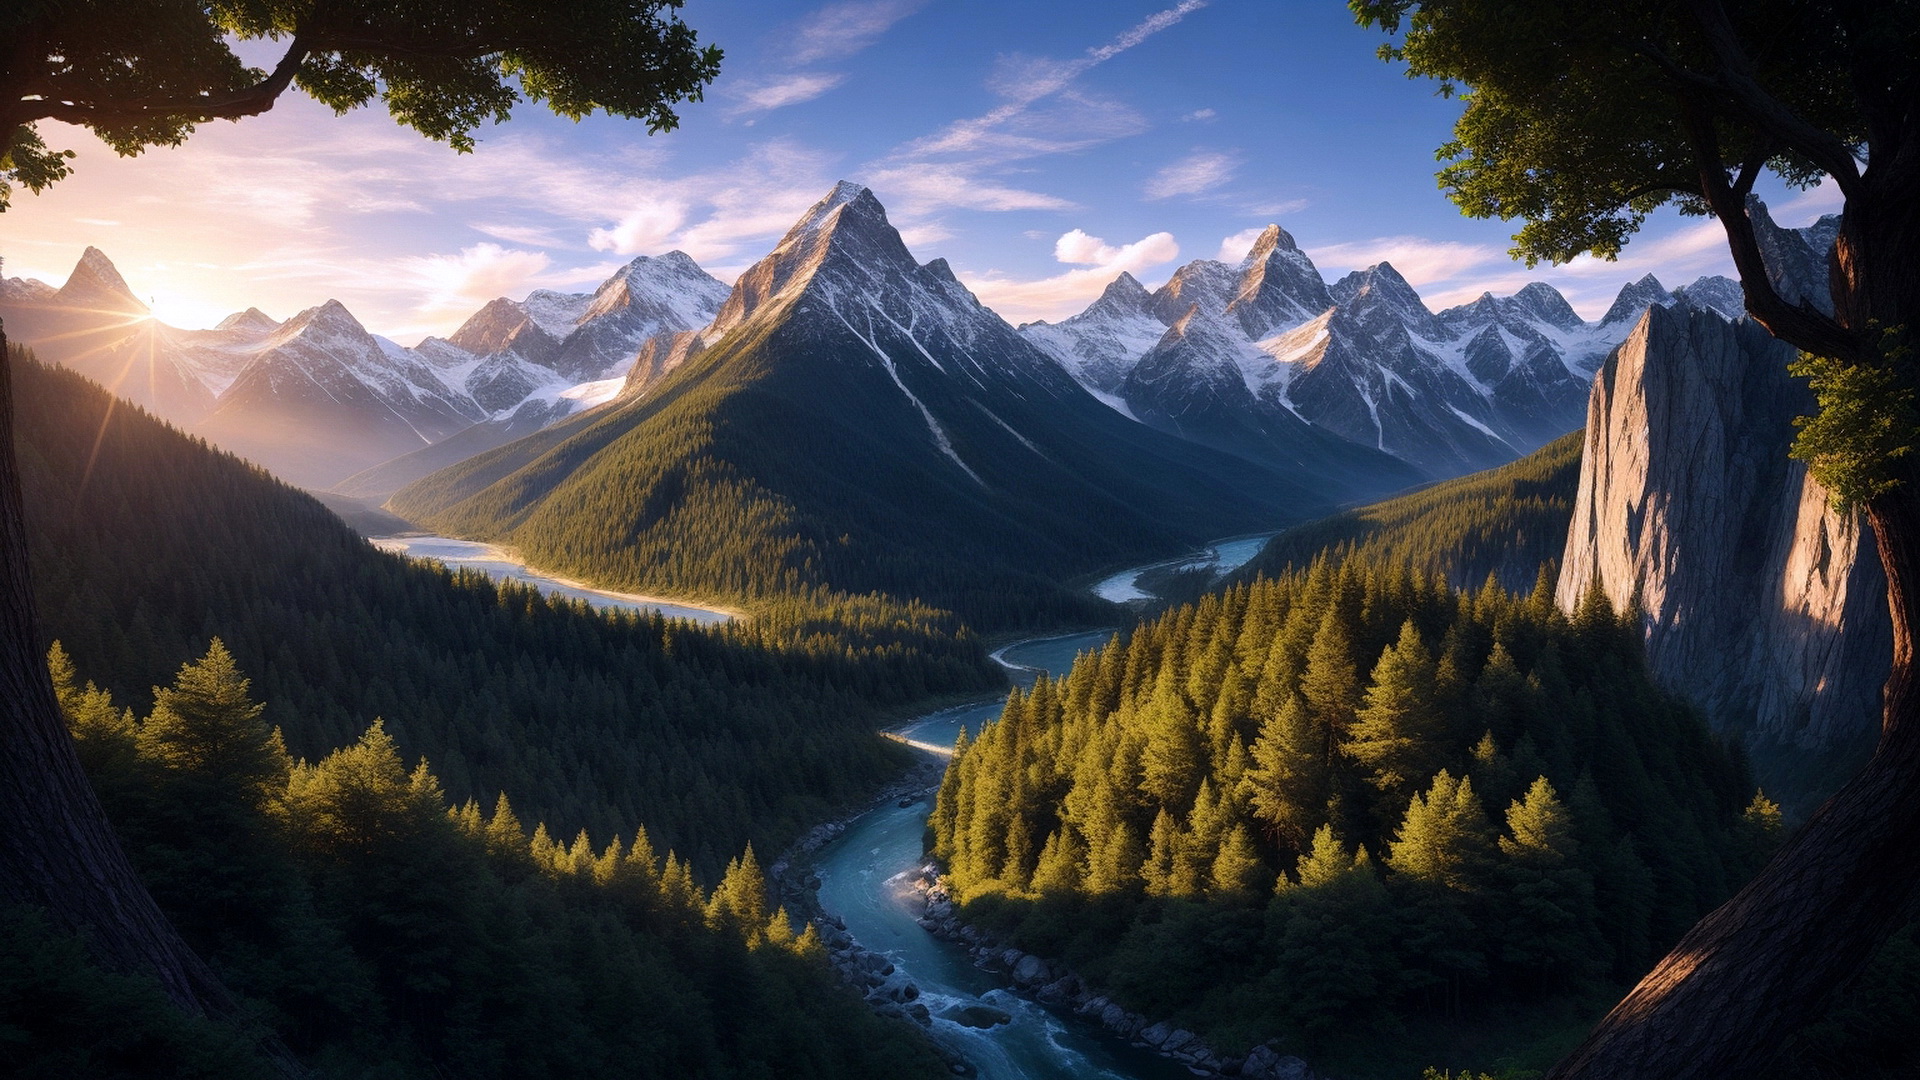 Mountain landscape and river with forest